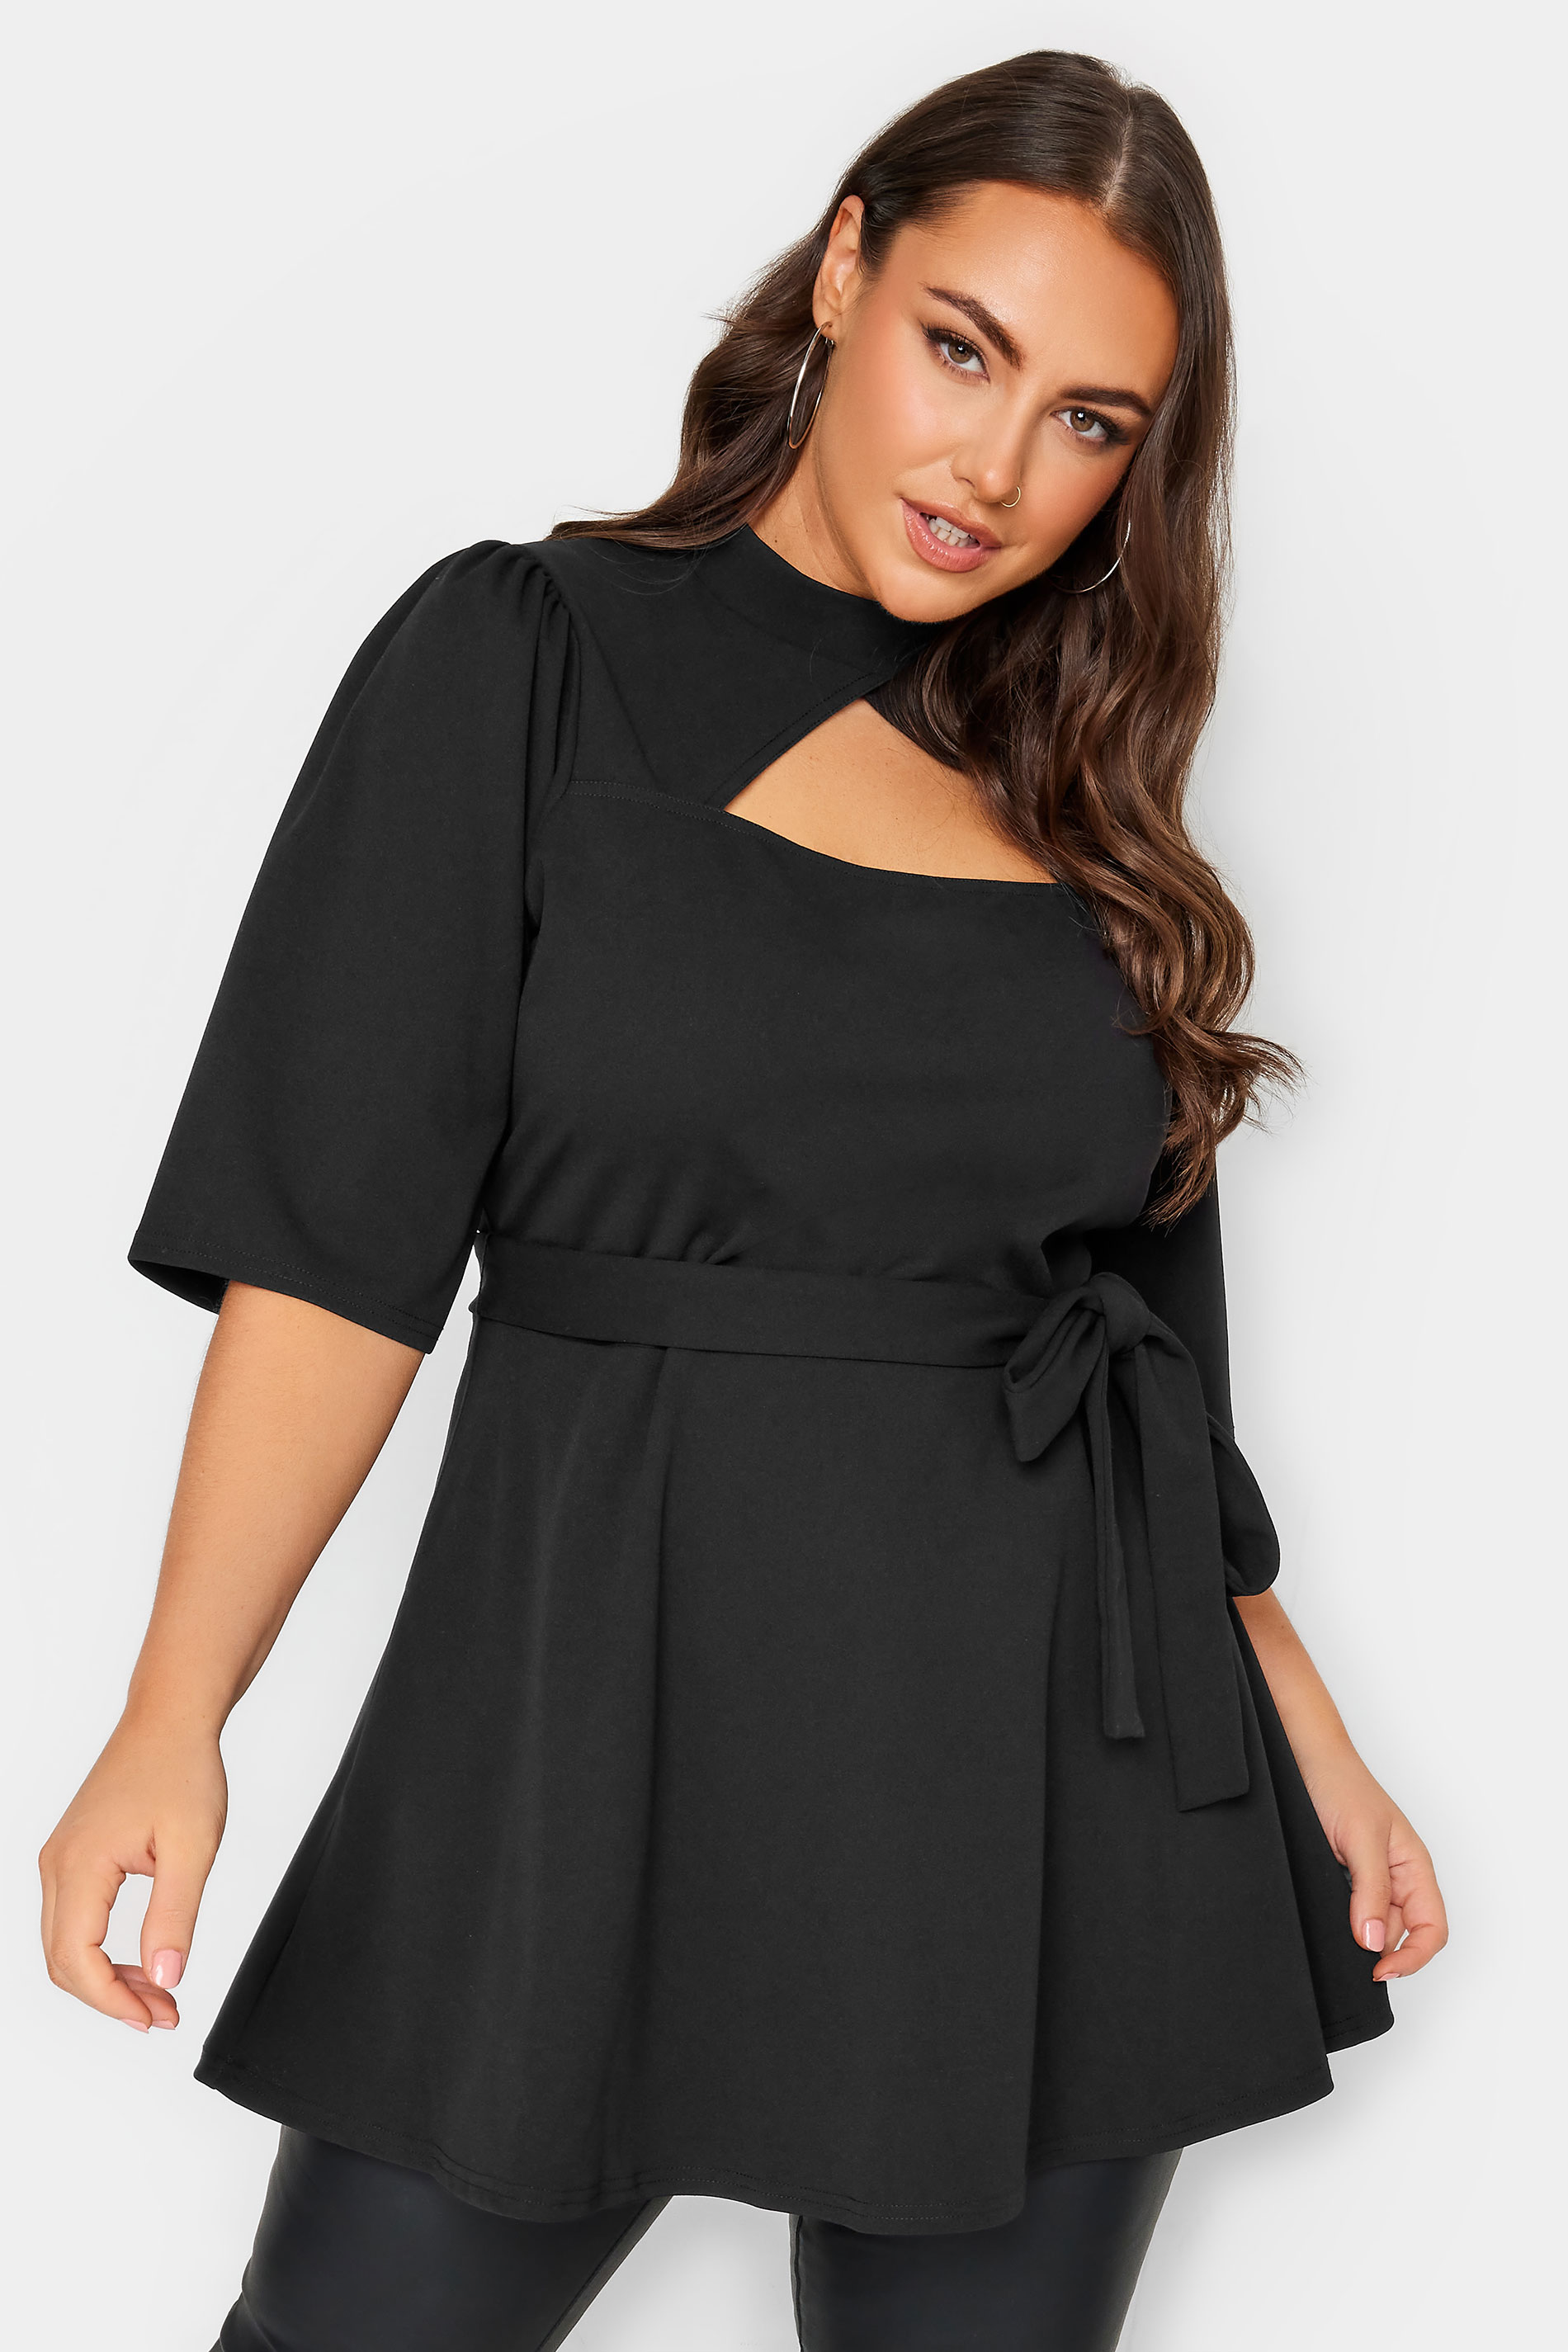 YOURS LONDON Plus Size Black Cut Out Detail Peplum Top | Yours Clothing